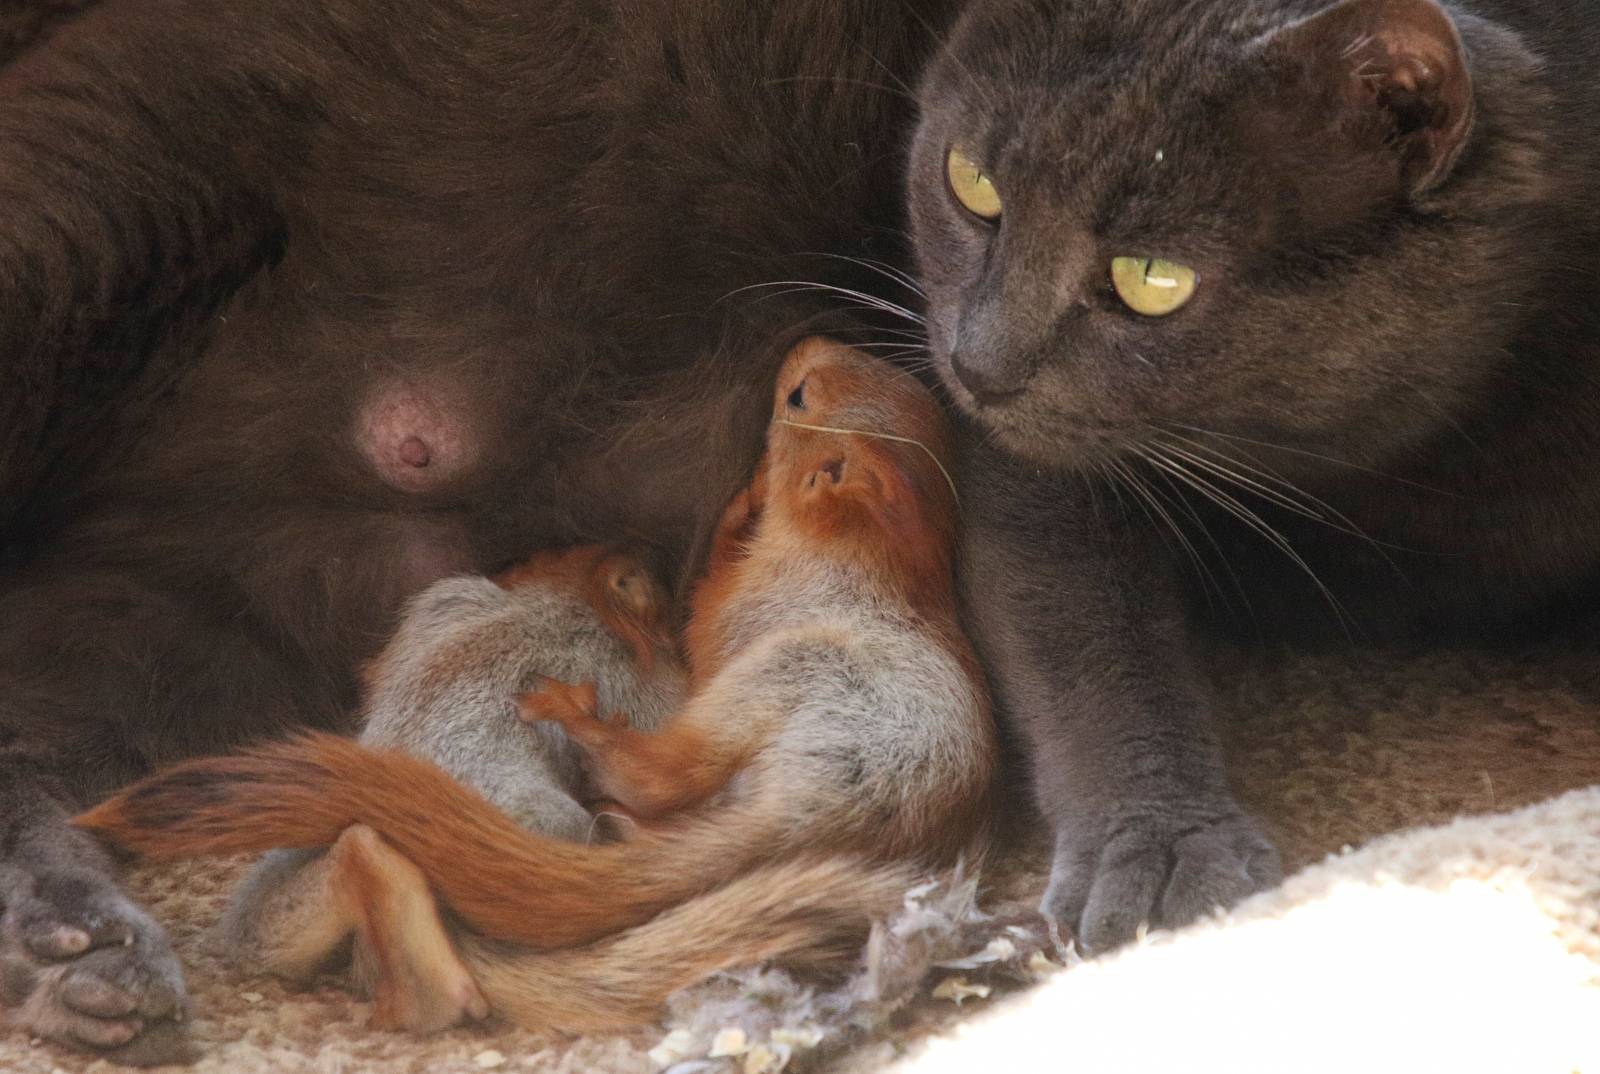 Pusha the cat feeds baby squirrels in Bakhchisaray